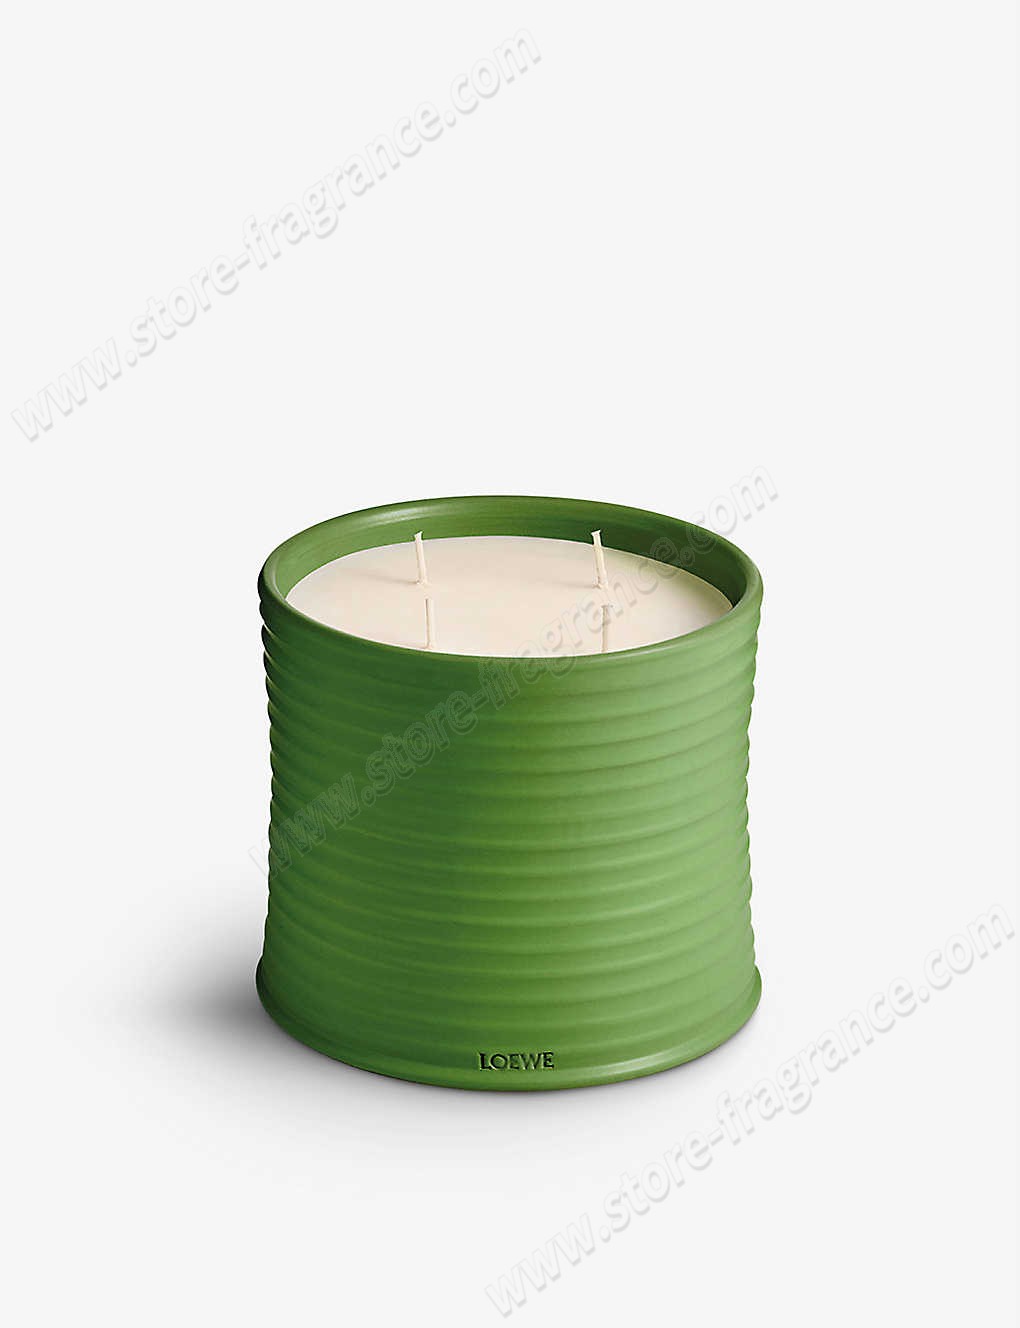 LOEWE/Luscious Pea large scented candle 2.12kg ✿ Discount Store - LOEWE/Luscious Pea large scented candle 2.12kg ✿ Discount Store